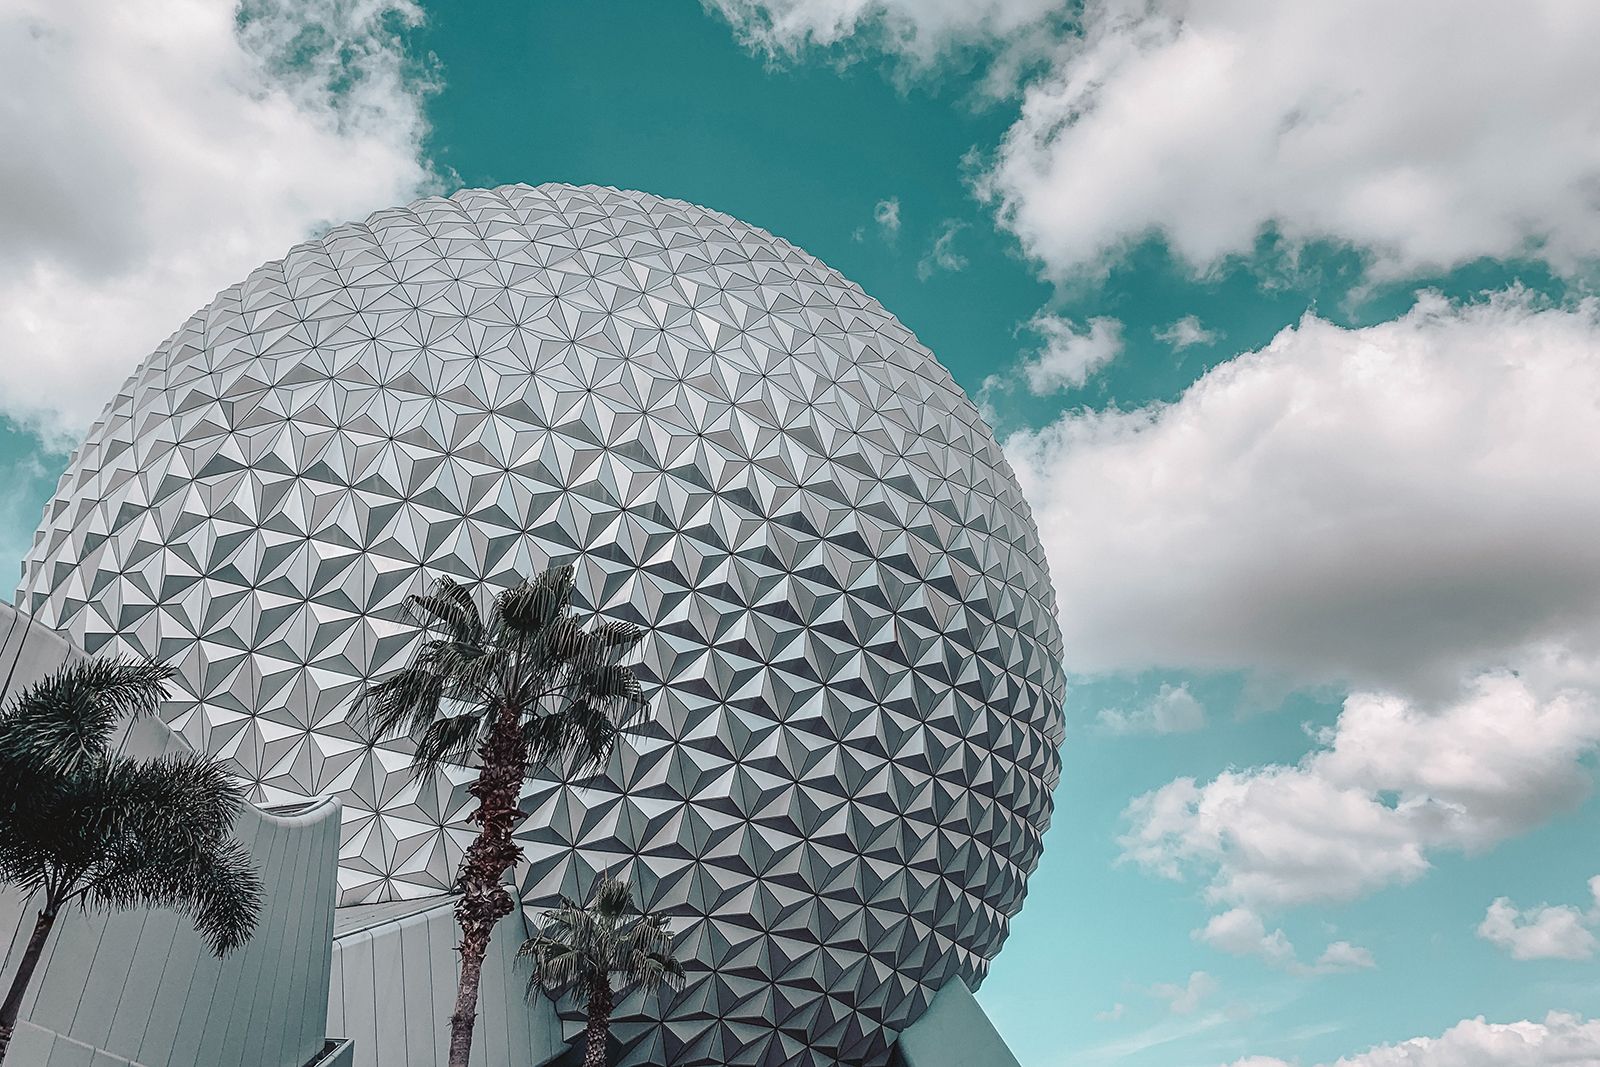 Disney's Radical Vision for the City of Tomorrow